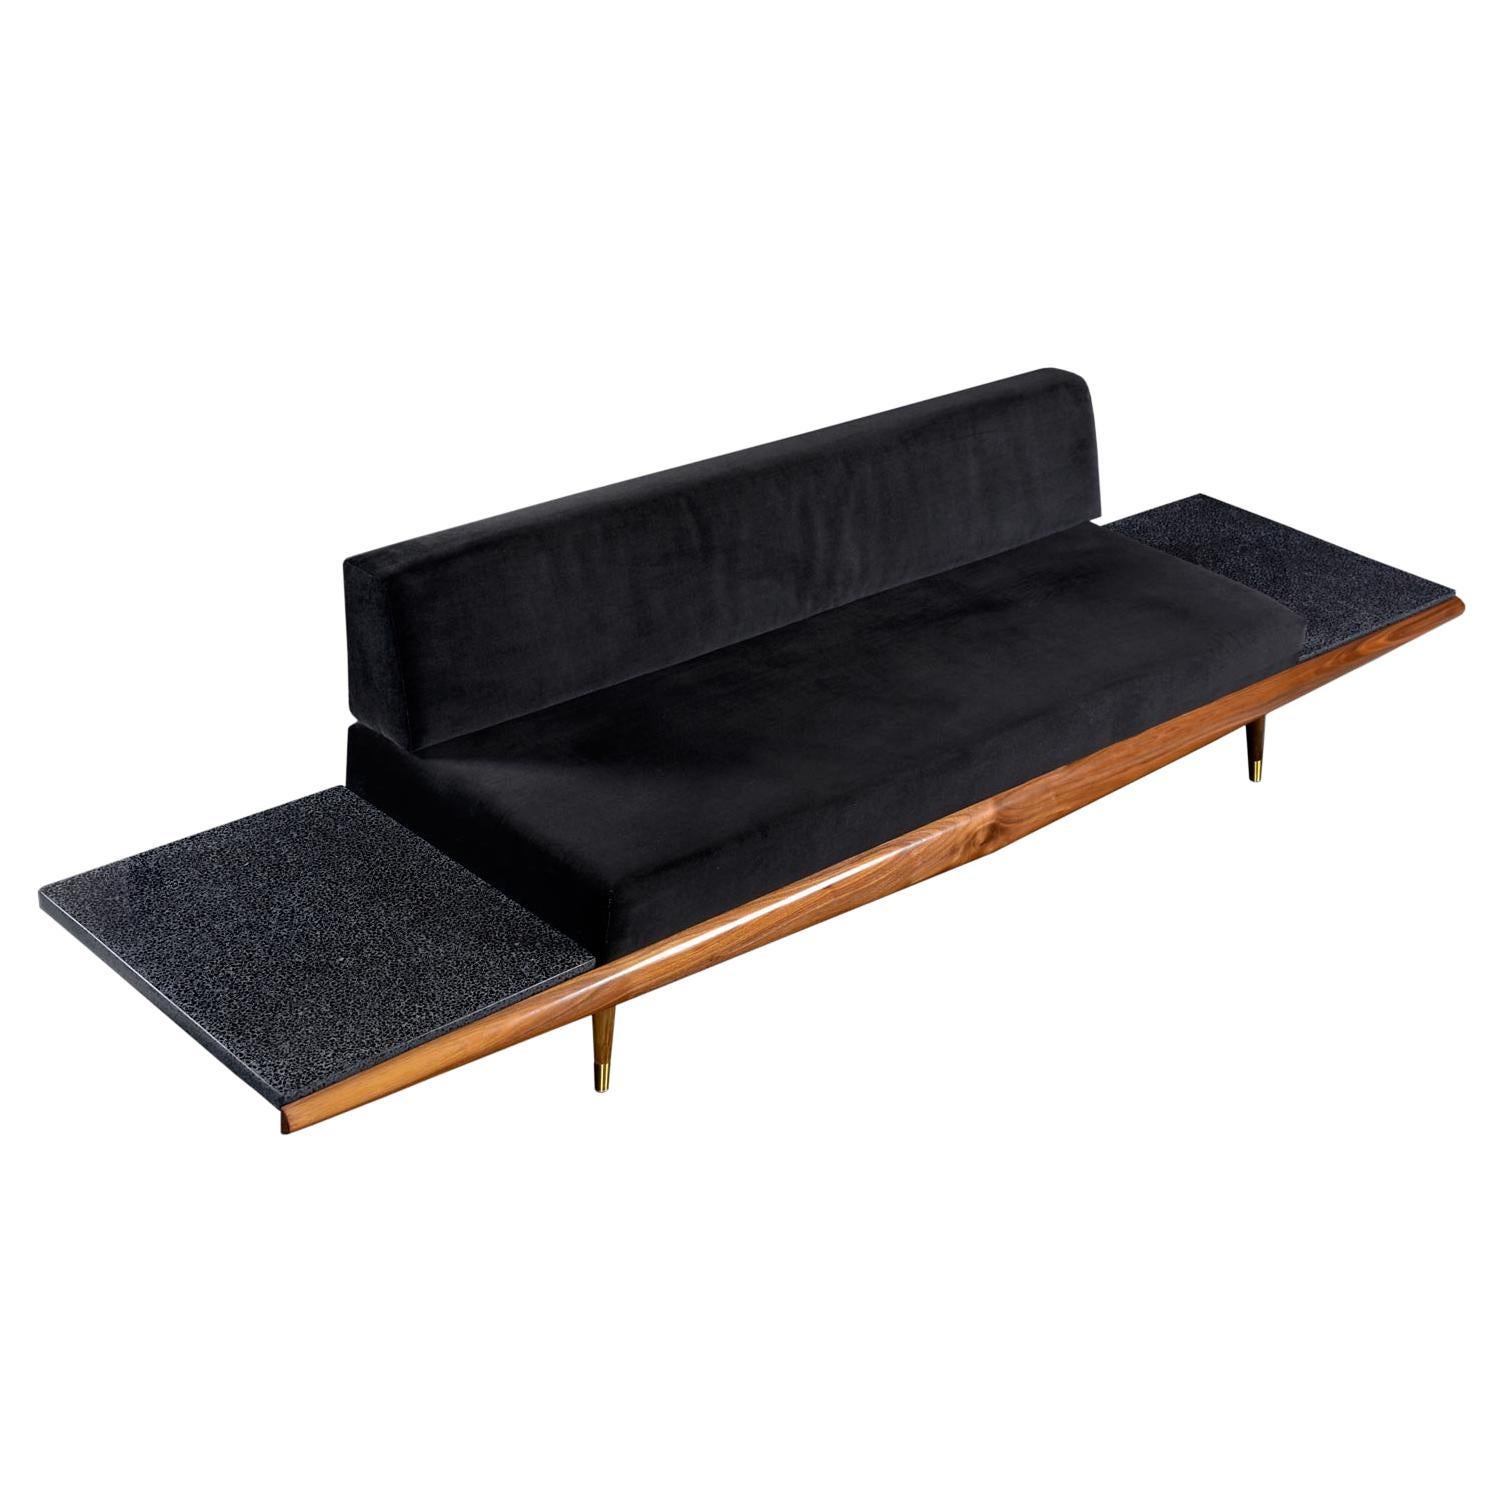 Dramatic, beautiful and sinister. At well over 10 feet long, this Adrian Pearsall sofa appears to be soaring like a B-2 bomber with the built-in, floating black terrazzo end tables extending like wings off the frame. Recently upholstered in black